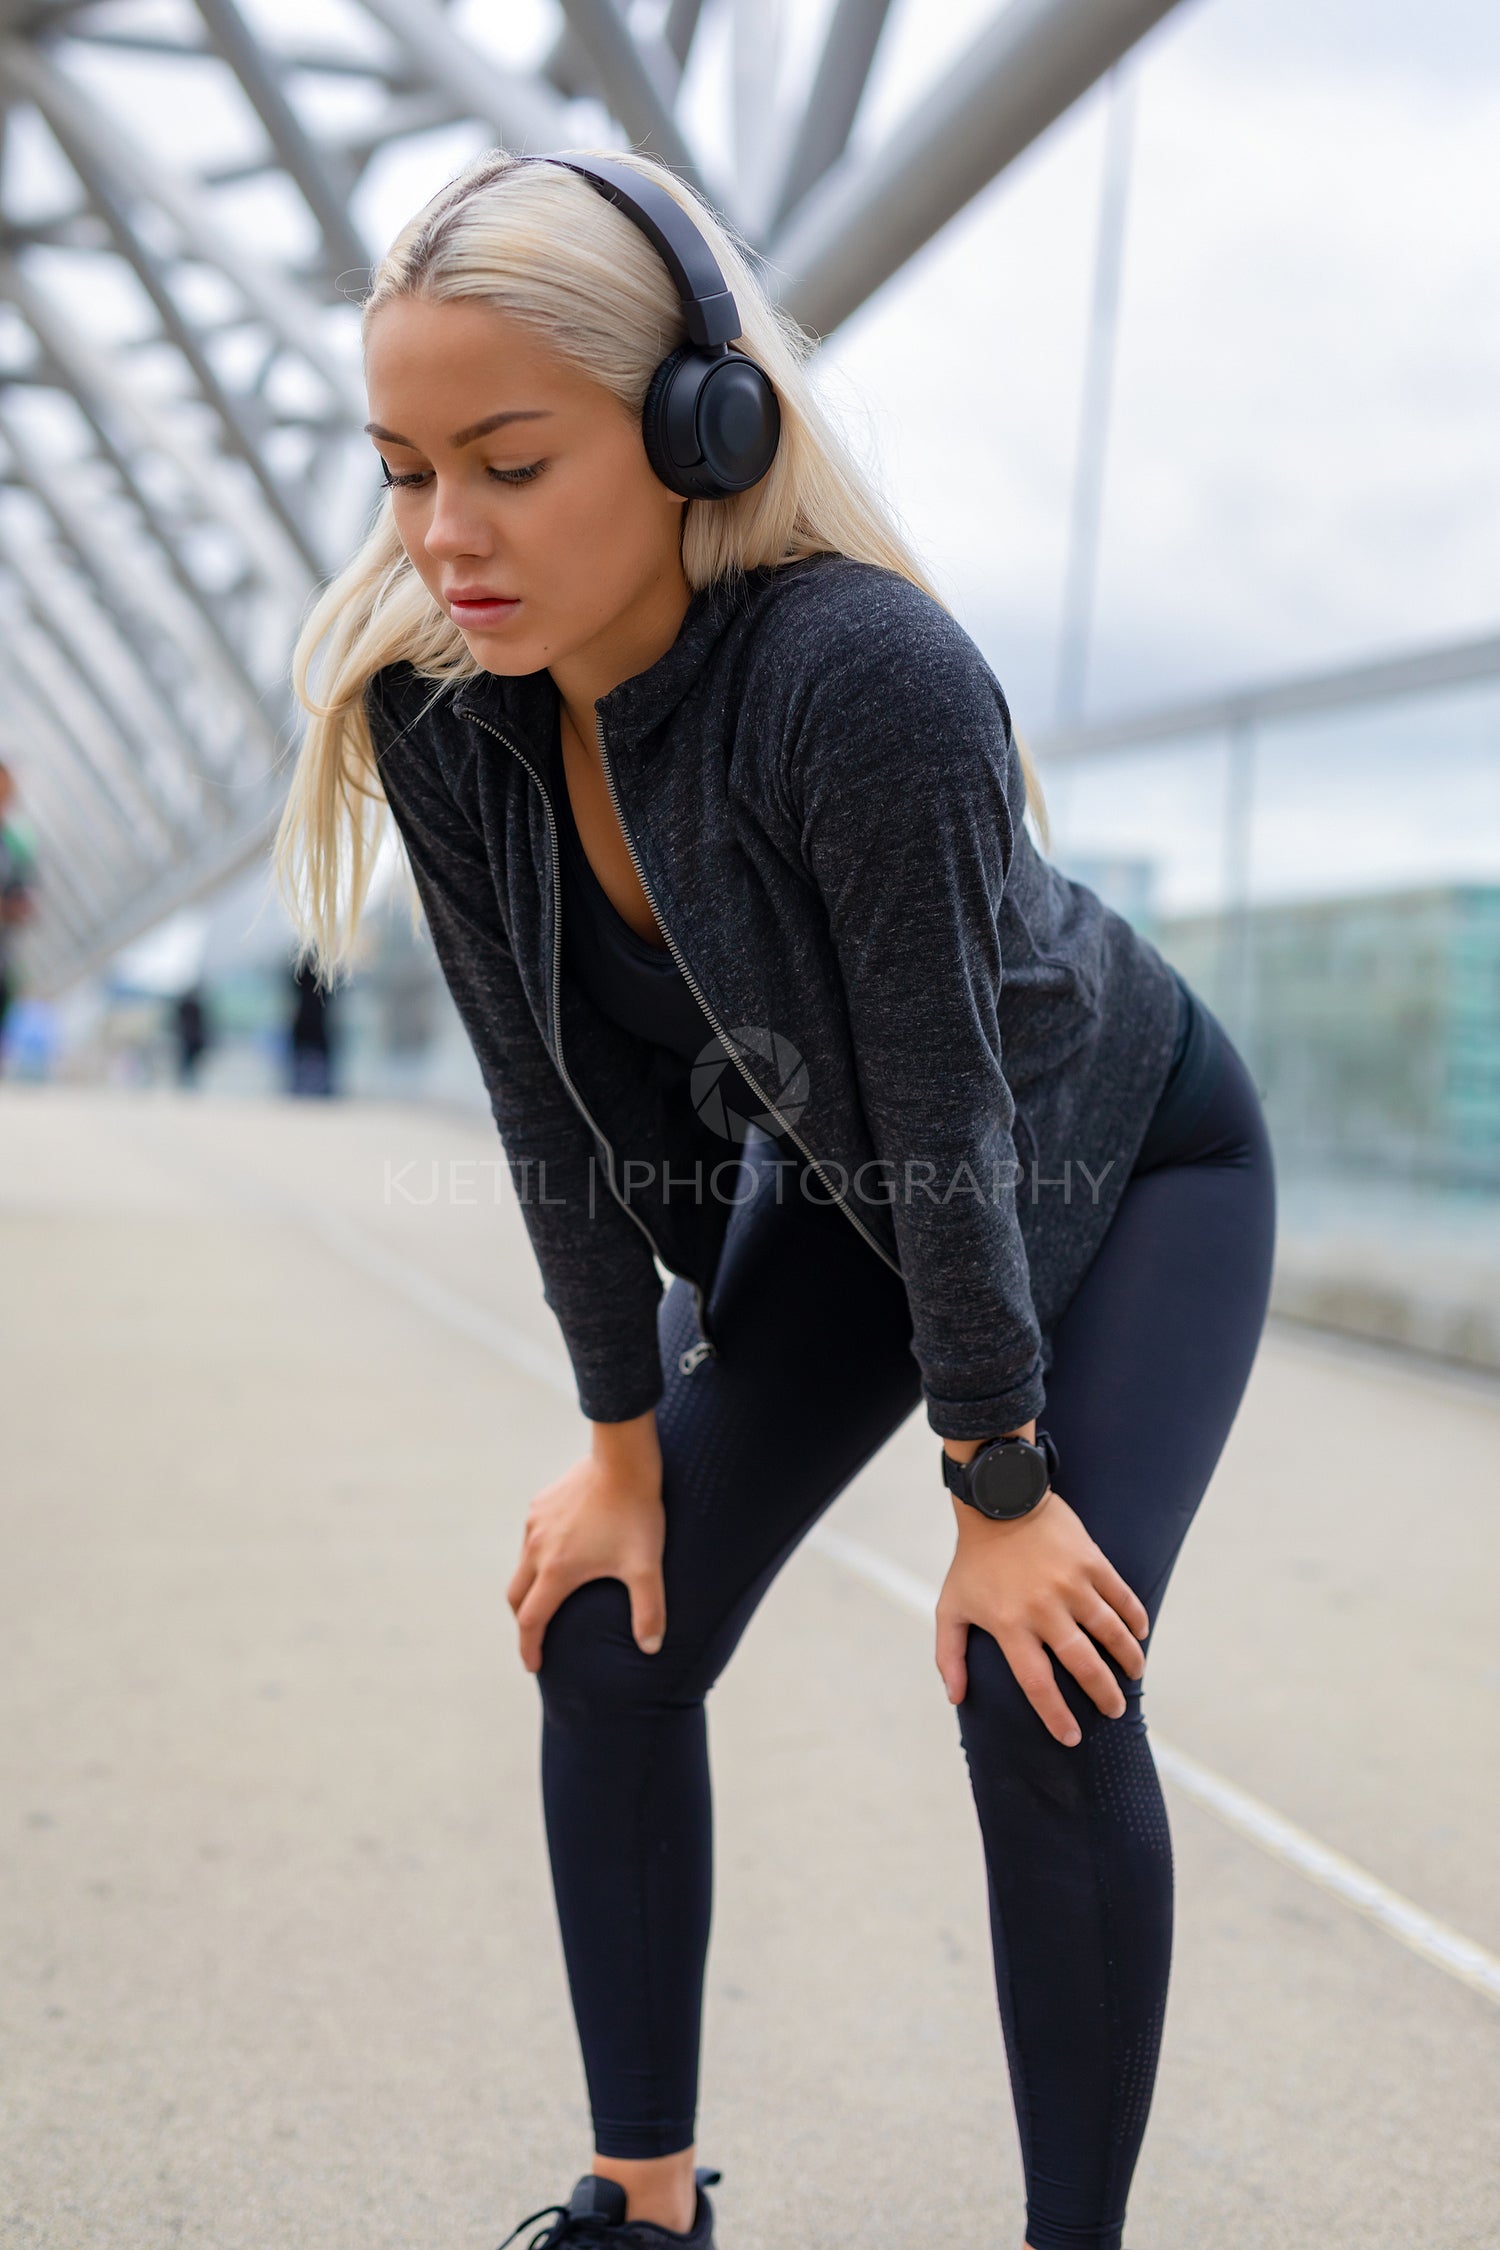 Exhausted Female Runner Resting With Hands On Knees After Workout